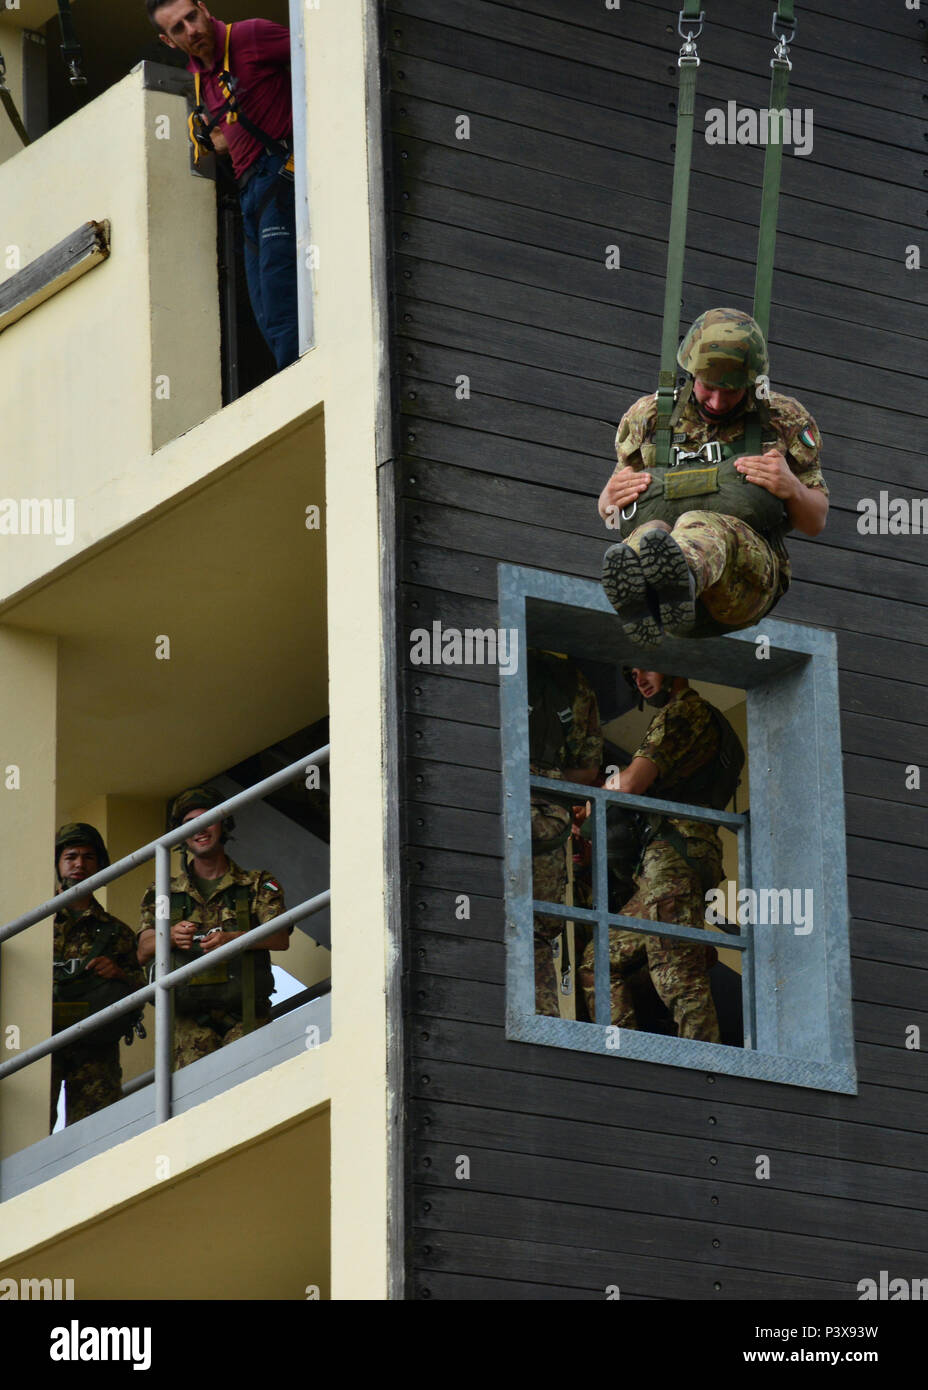 An Italian army cadet, assigned to the Centre of Excellence Italian Airborne Folgore in Pisa, exits the 7th Army Training Command tower during basic airborne training at Caserma Ederle, Vicenza, Italy, July 12, 2016. The 7th Army Training Command tower is 34-feet high and the only Army jump tower in Europe. (Photo by Visual Information Specialist Massimo Bovo/Released) Stock Photo